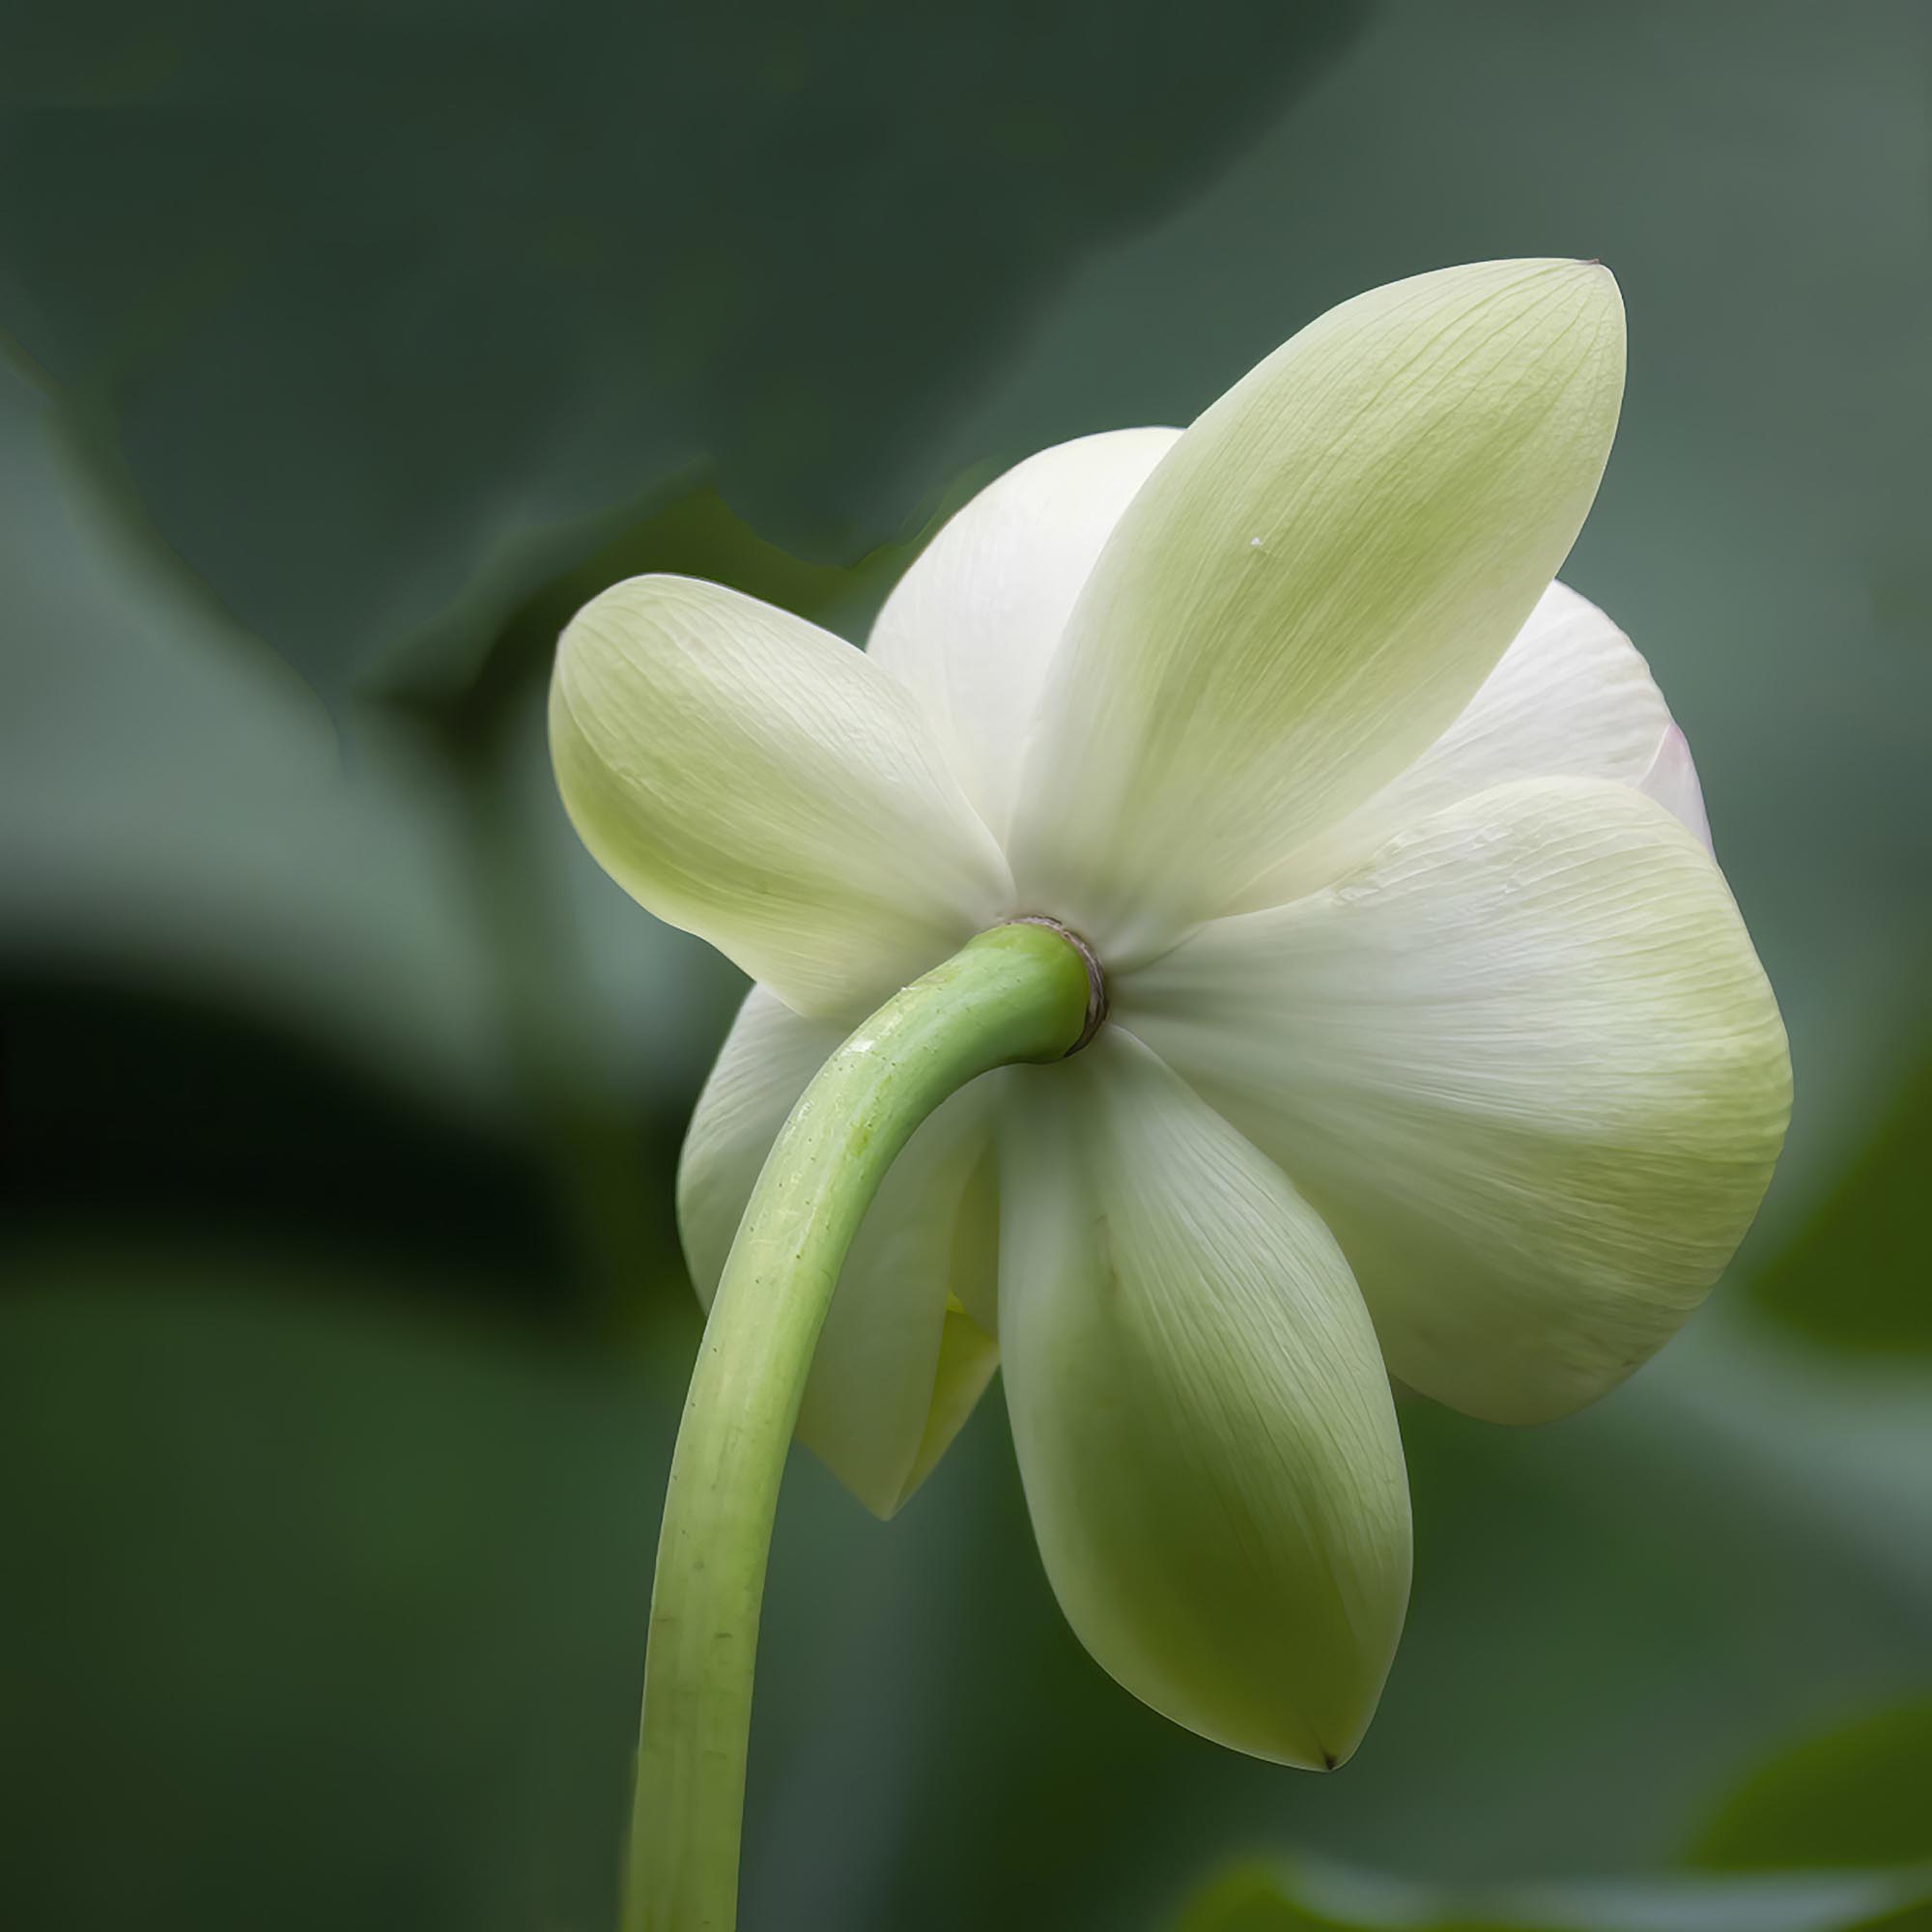 The back of a white flower